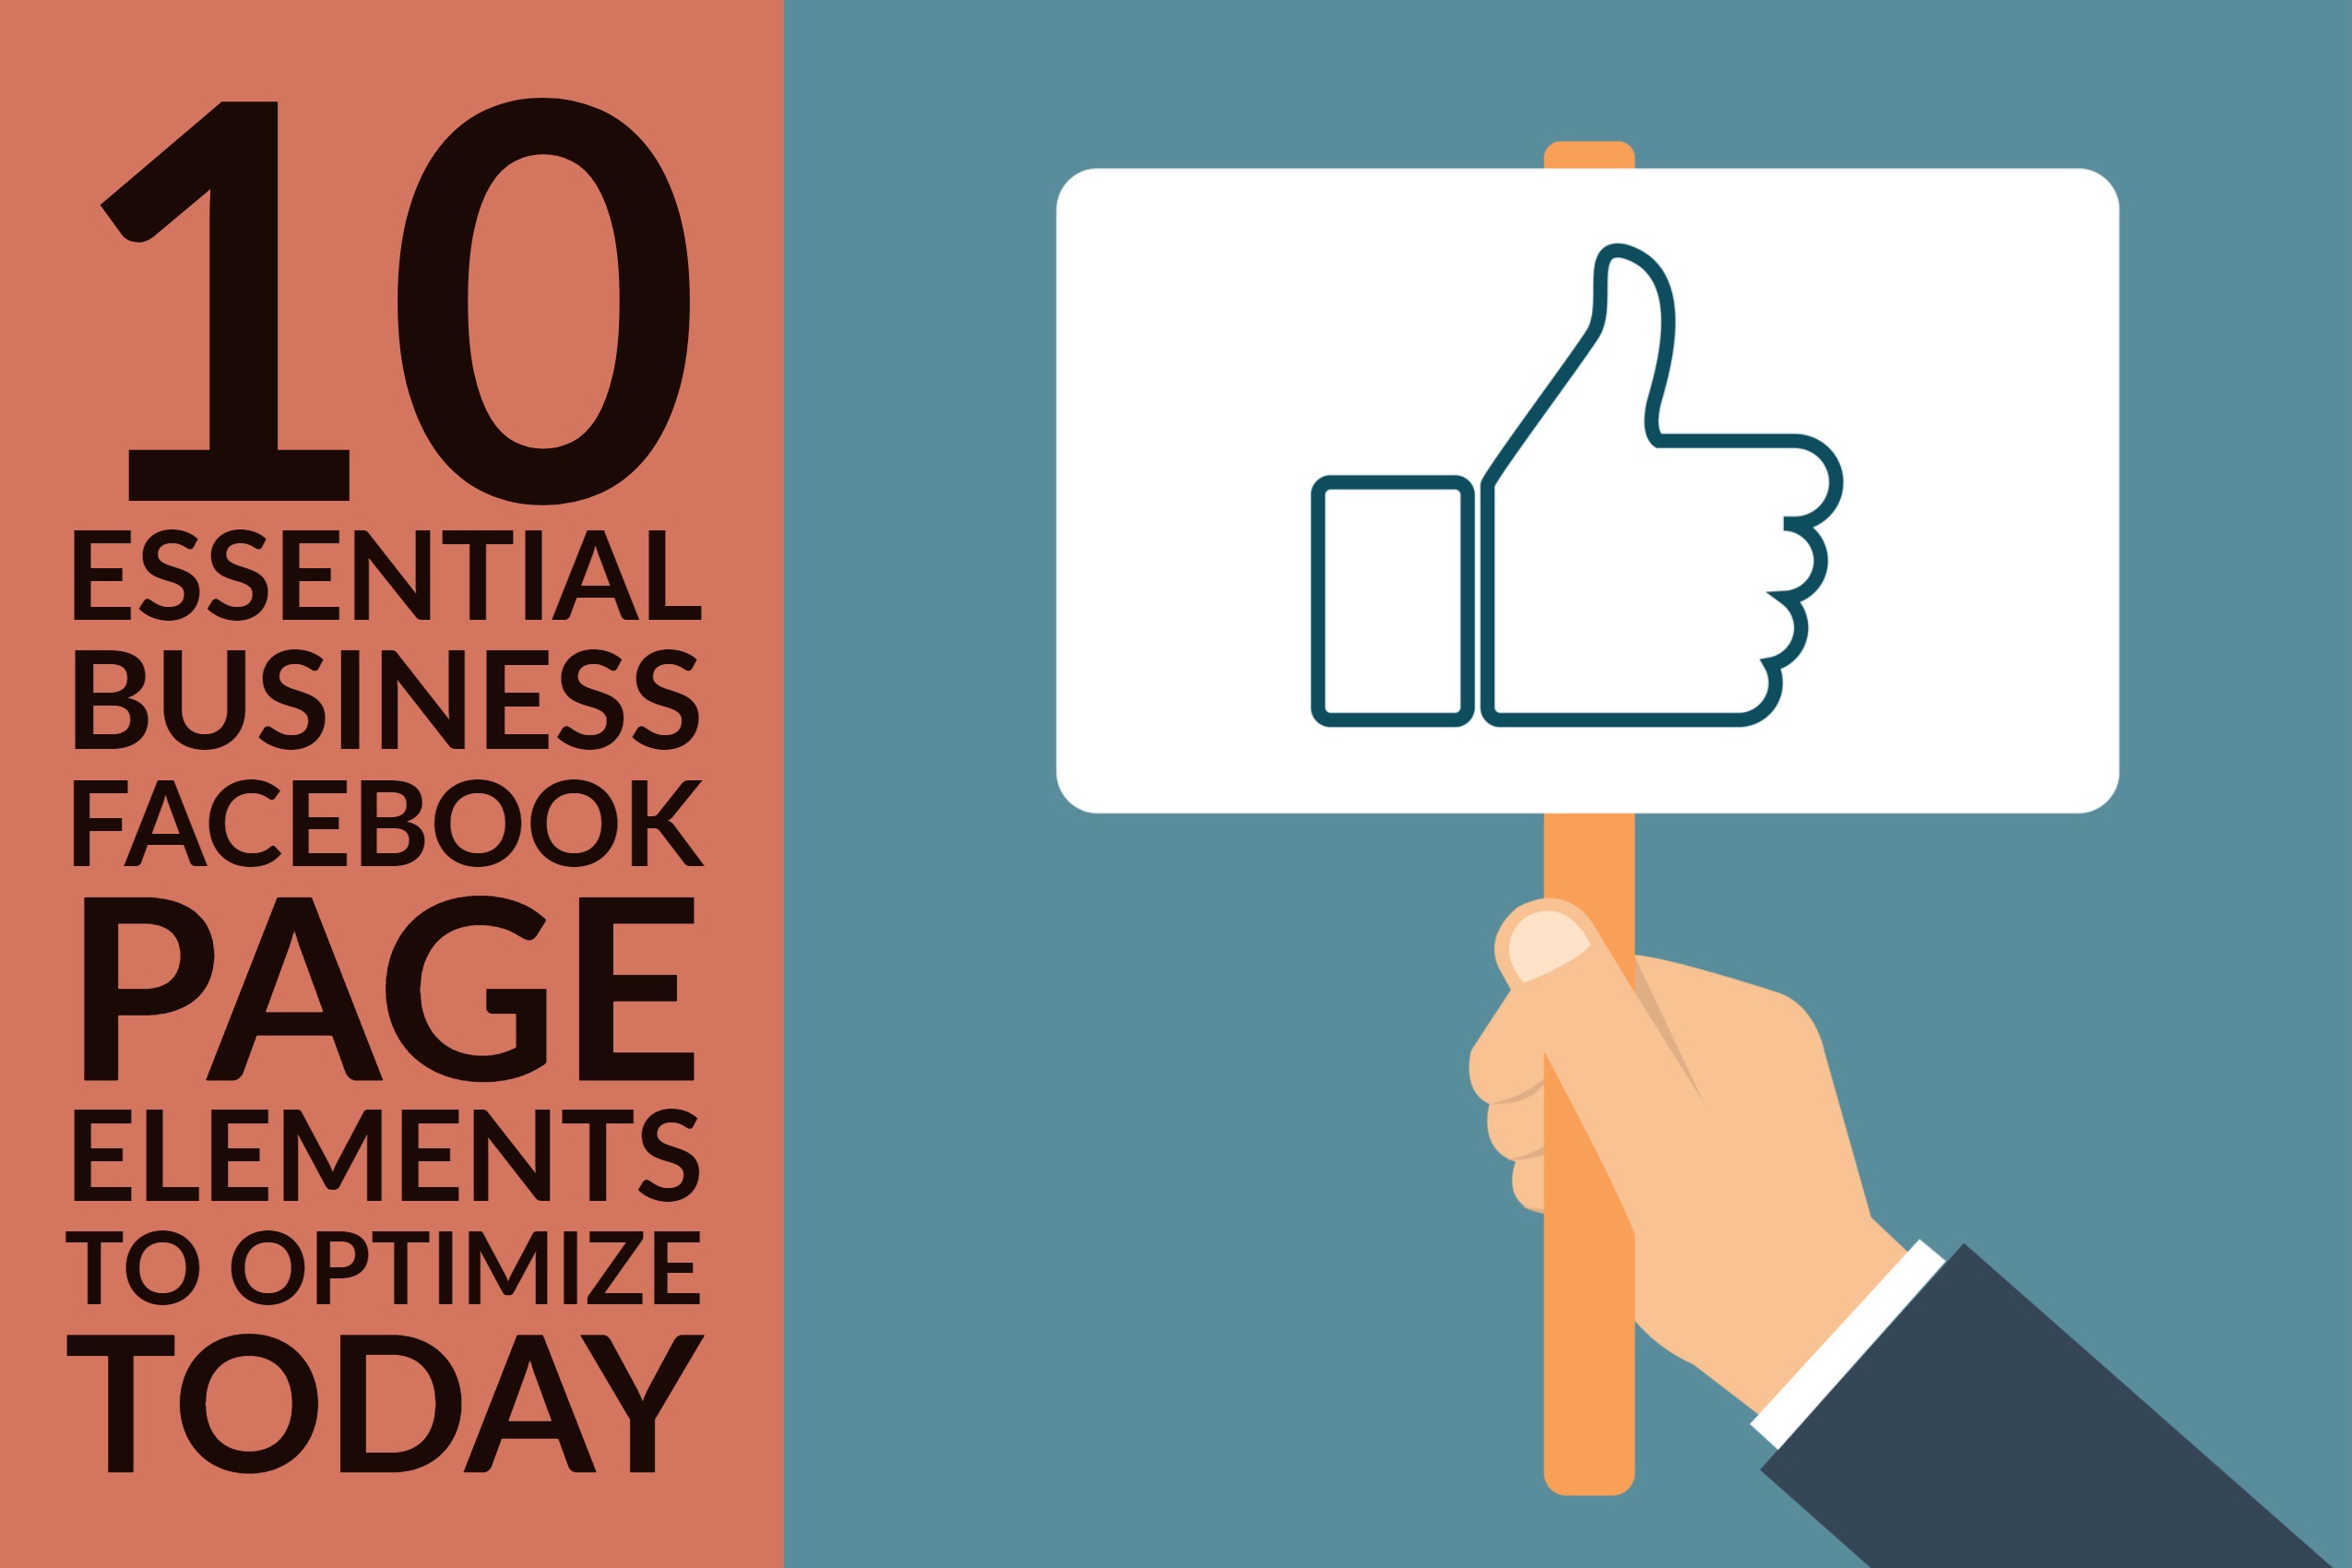 10 Essential Business Facebook Page Elements To Optimize Today